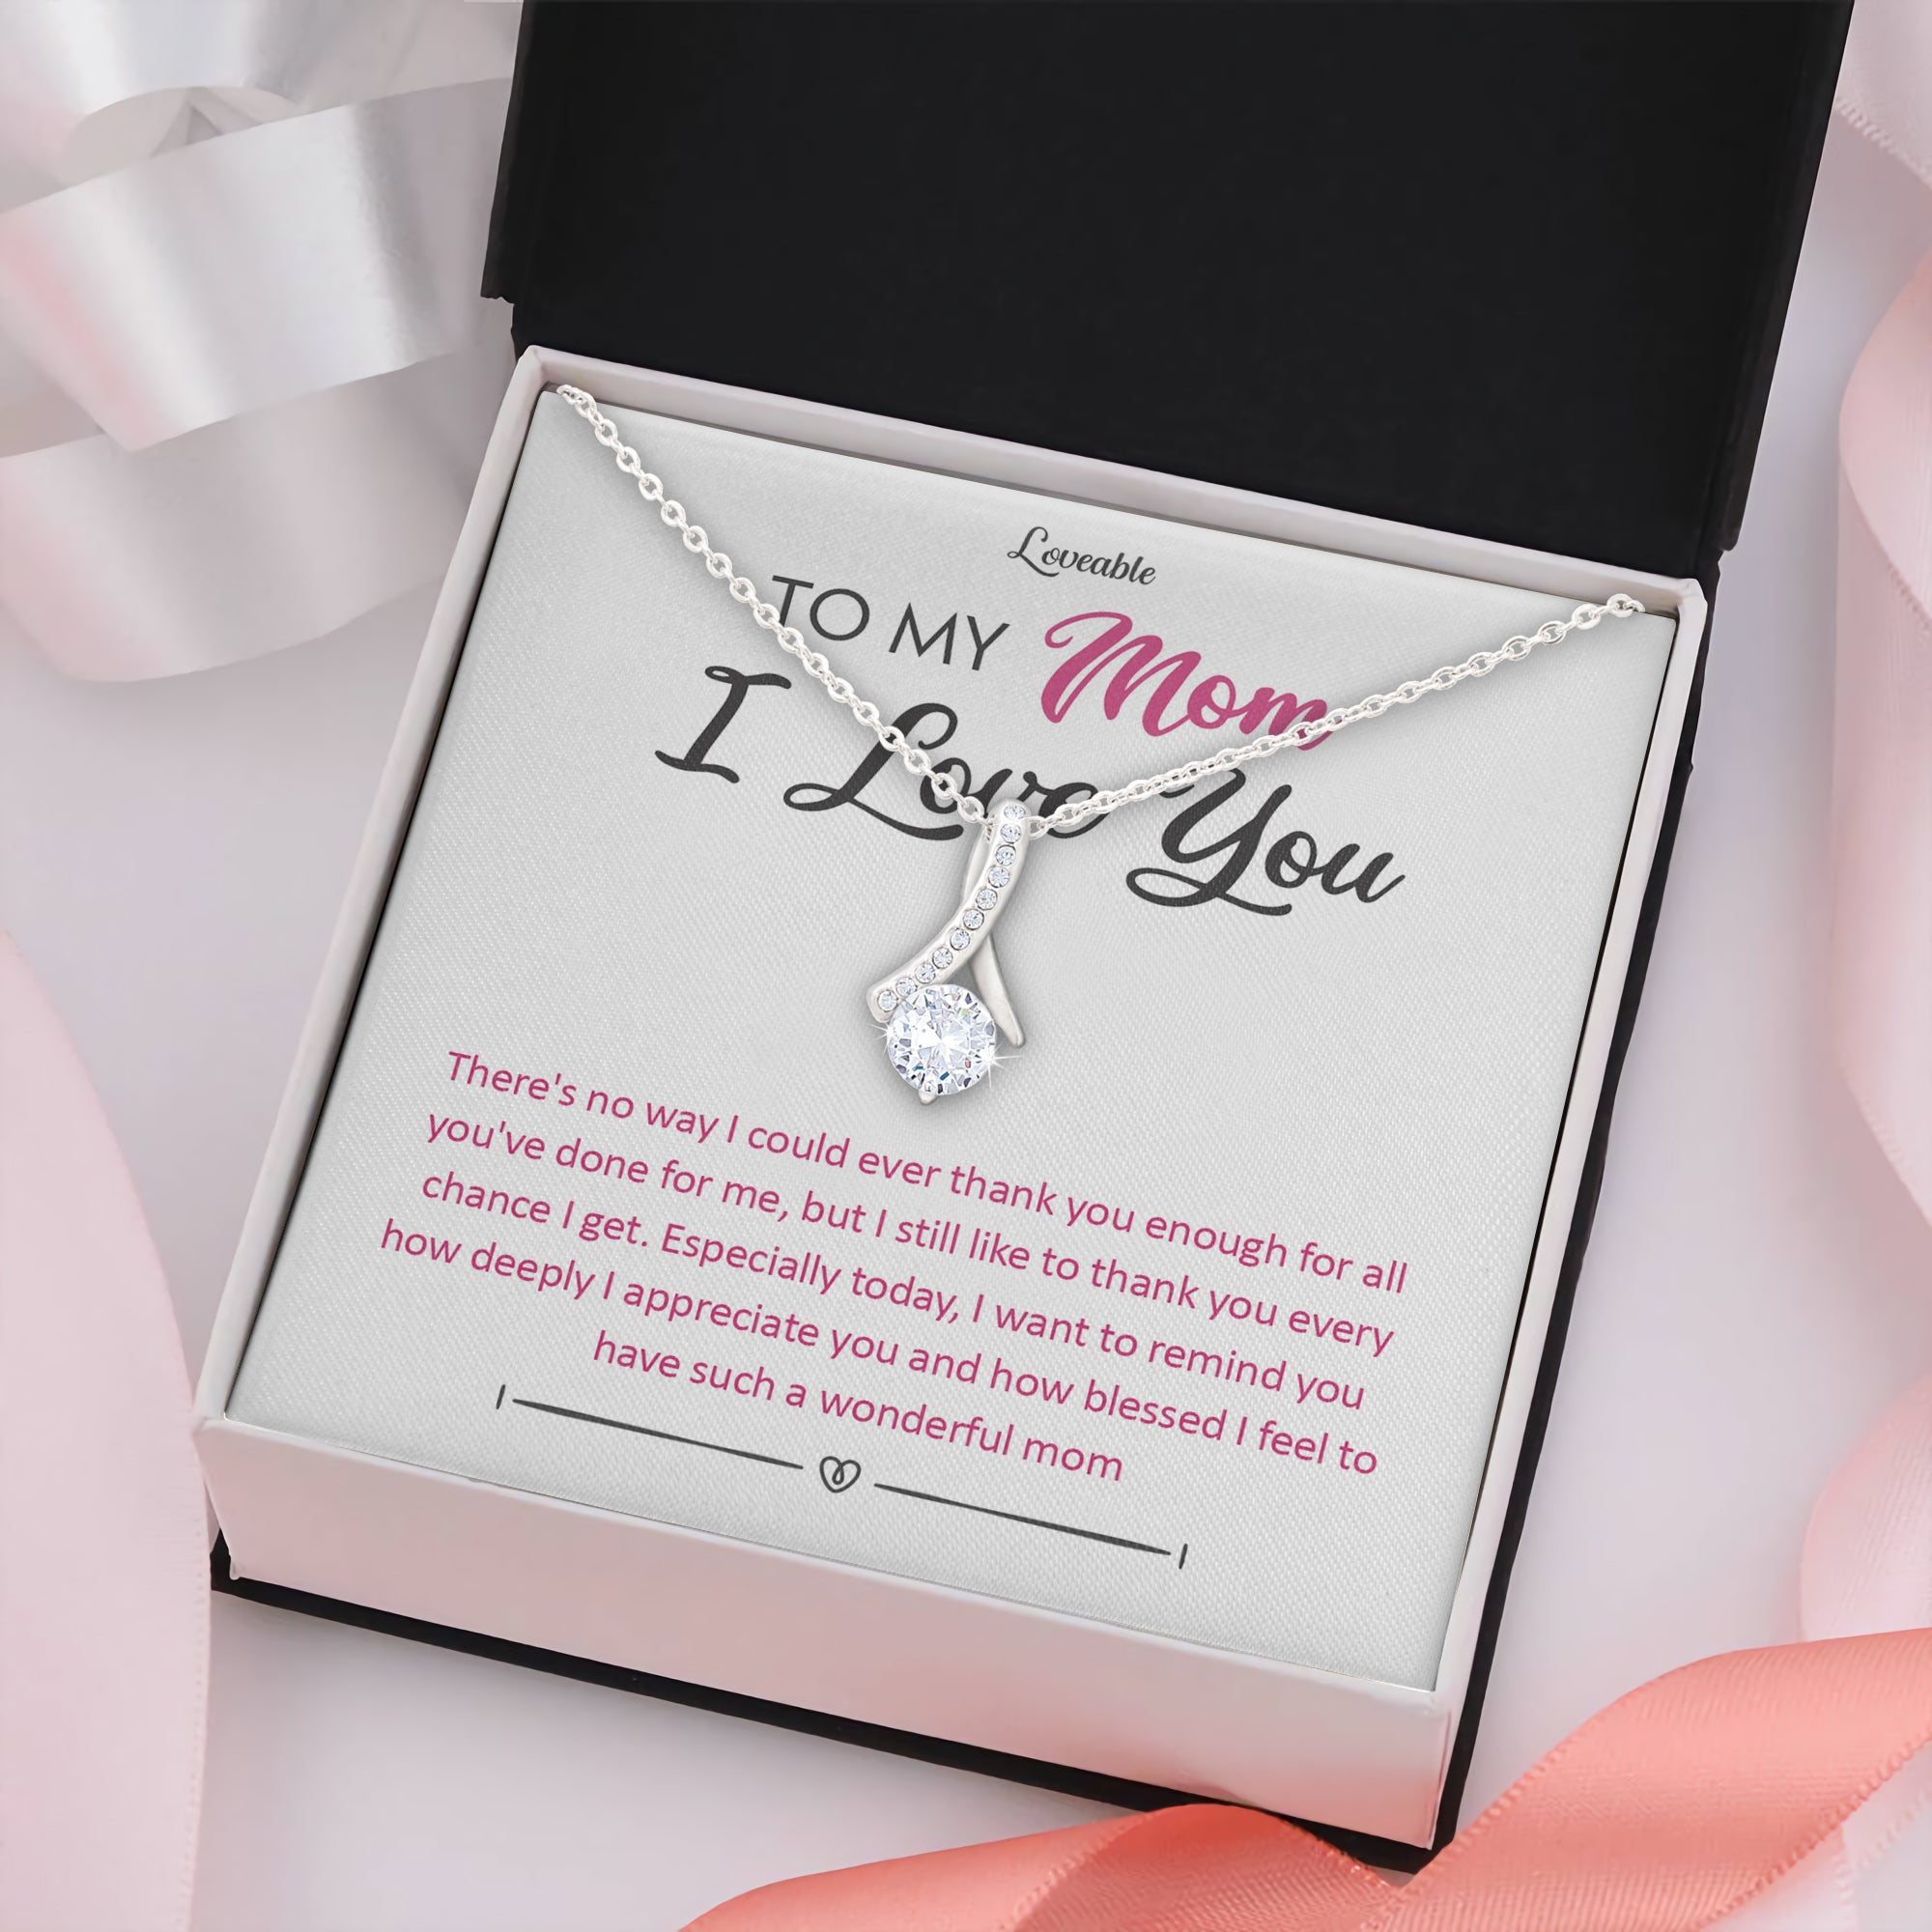 To My Mom I Love You - Best Crystal Gifts for Mom